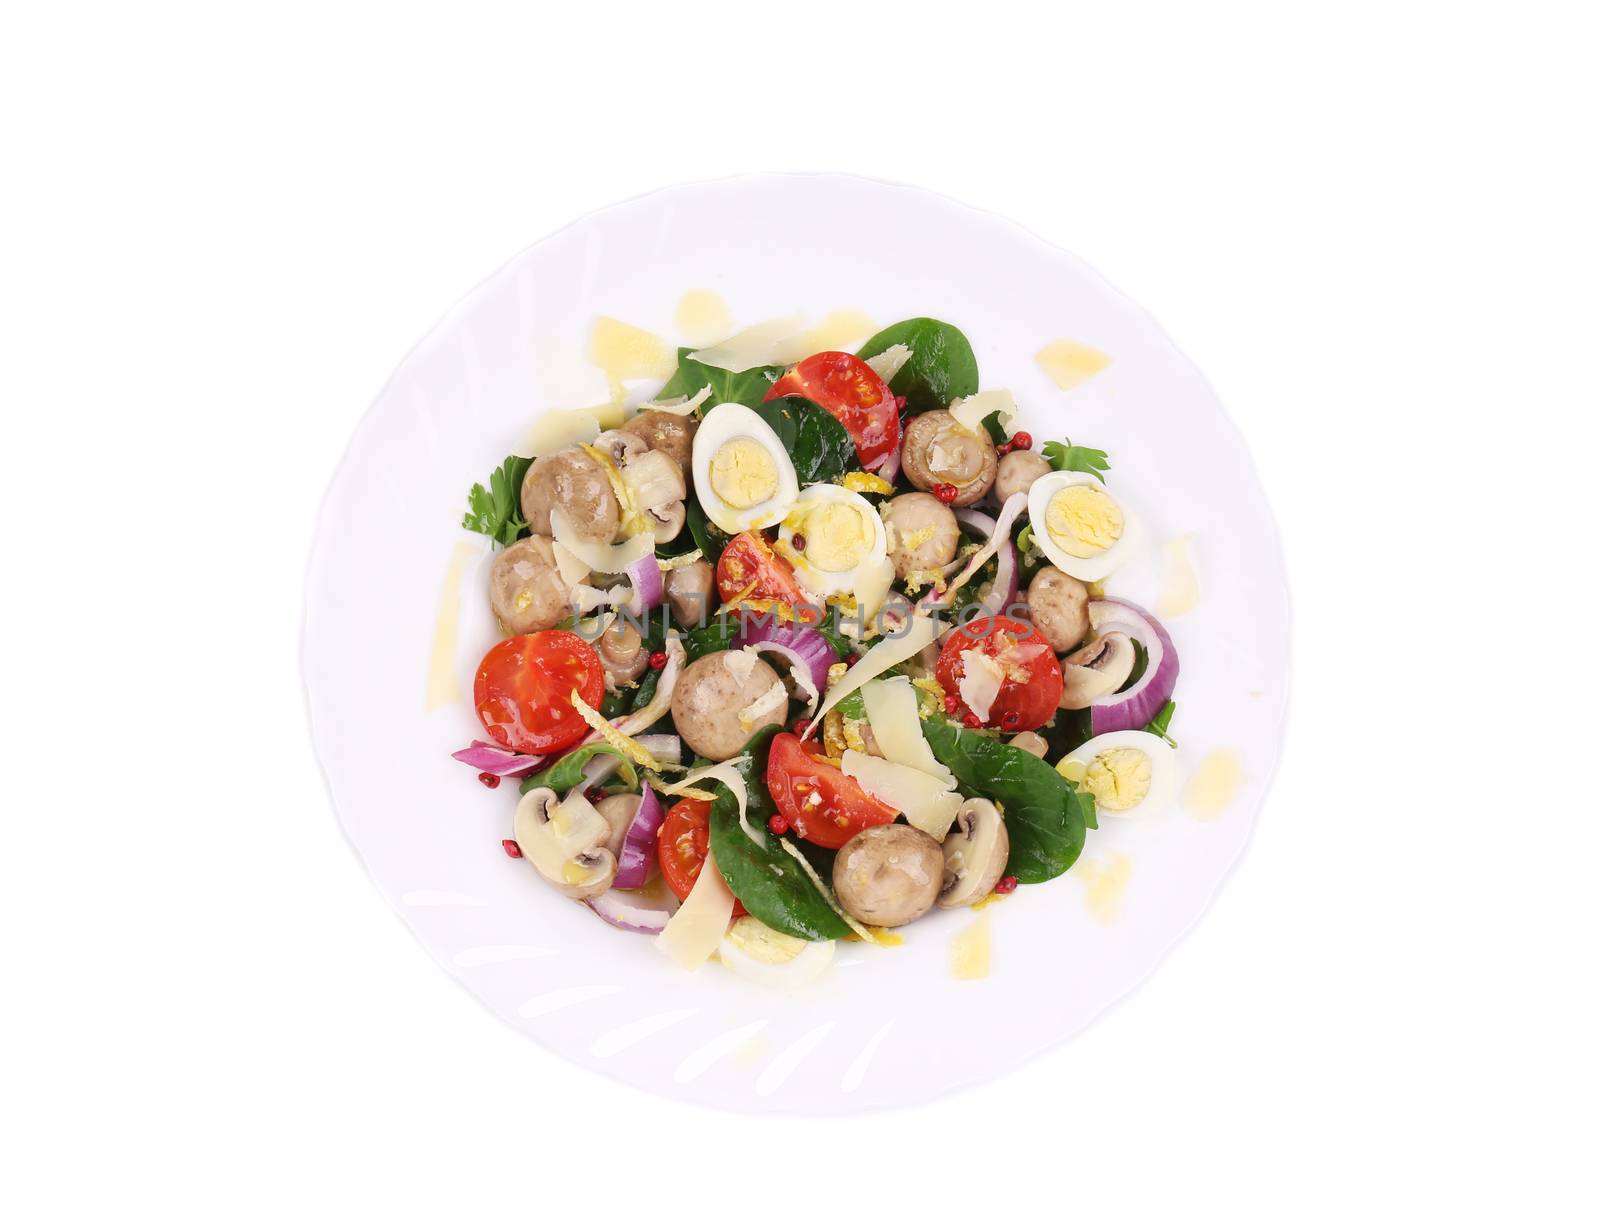 Mushroom salad with tomatoes and quail eggs. Isolated on a white background.